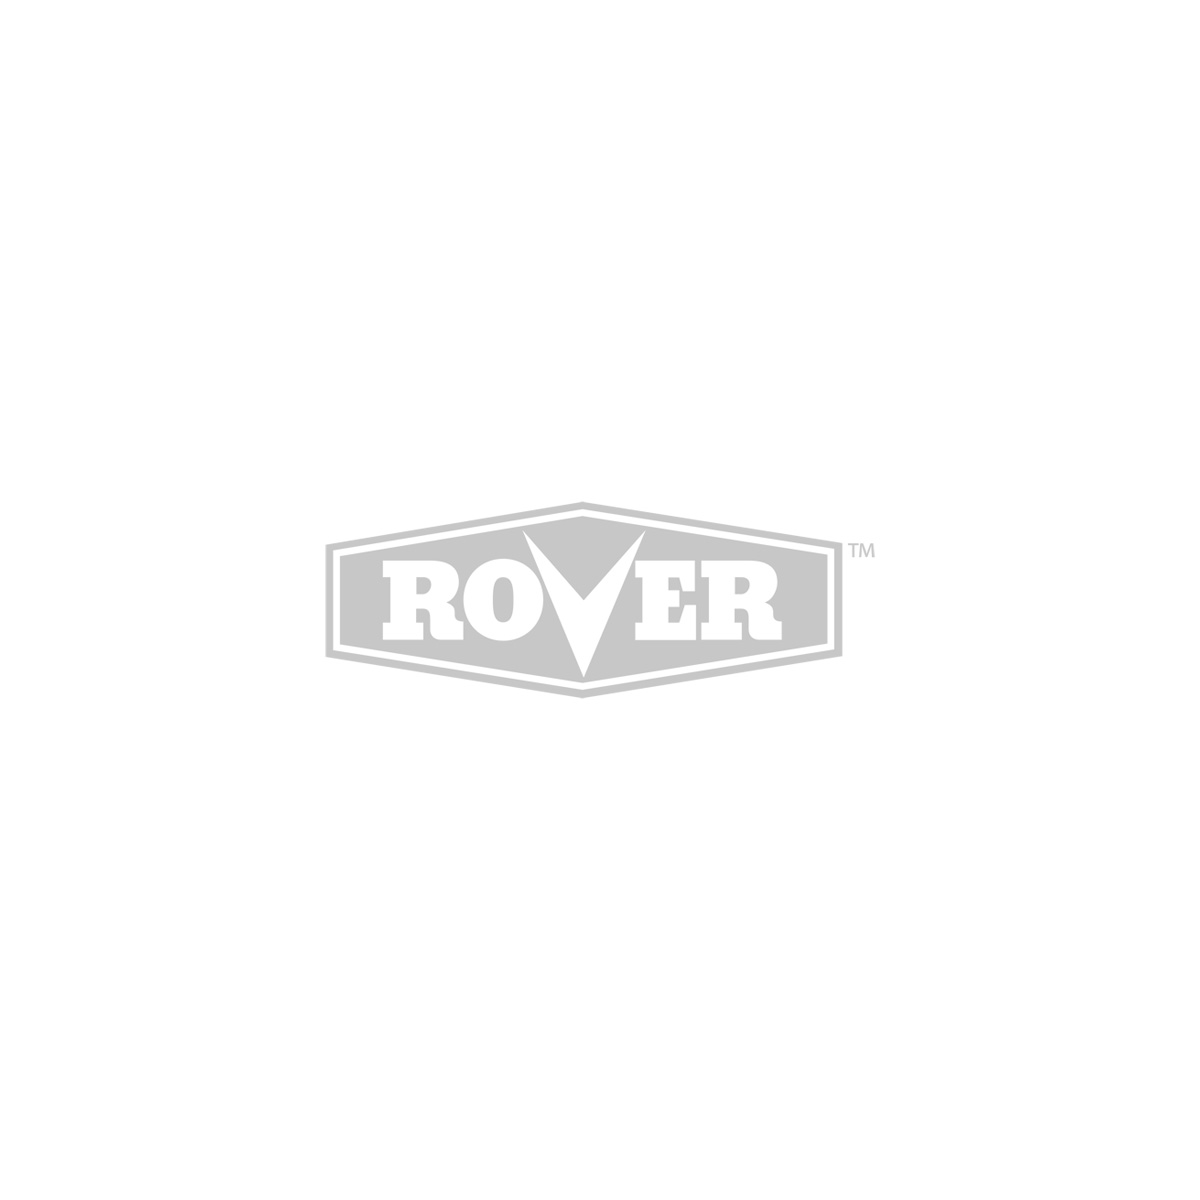 Rover CORE Charger